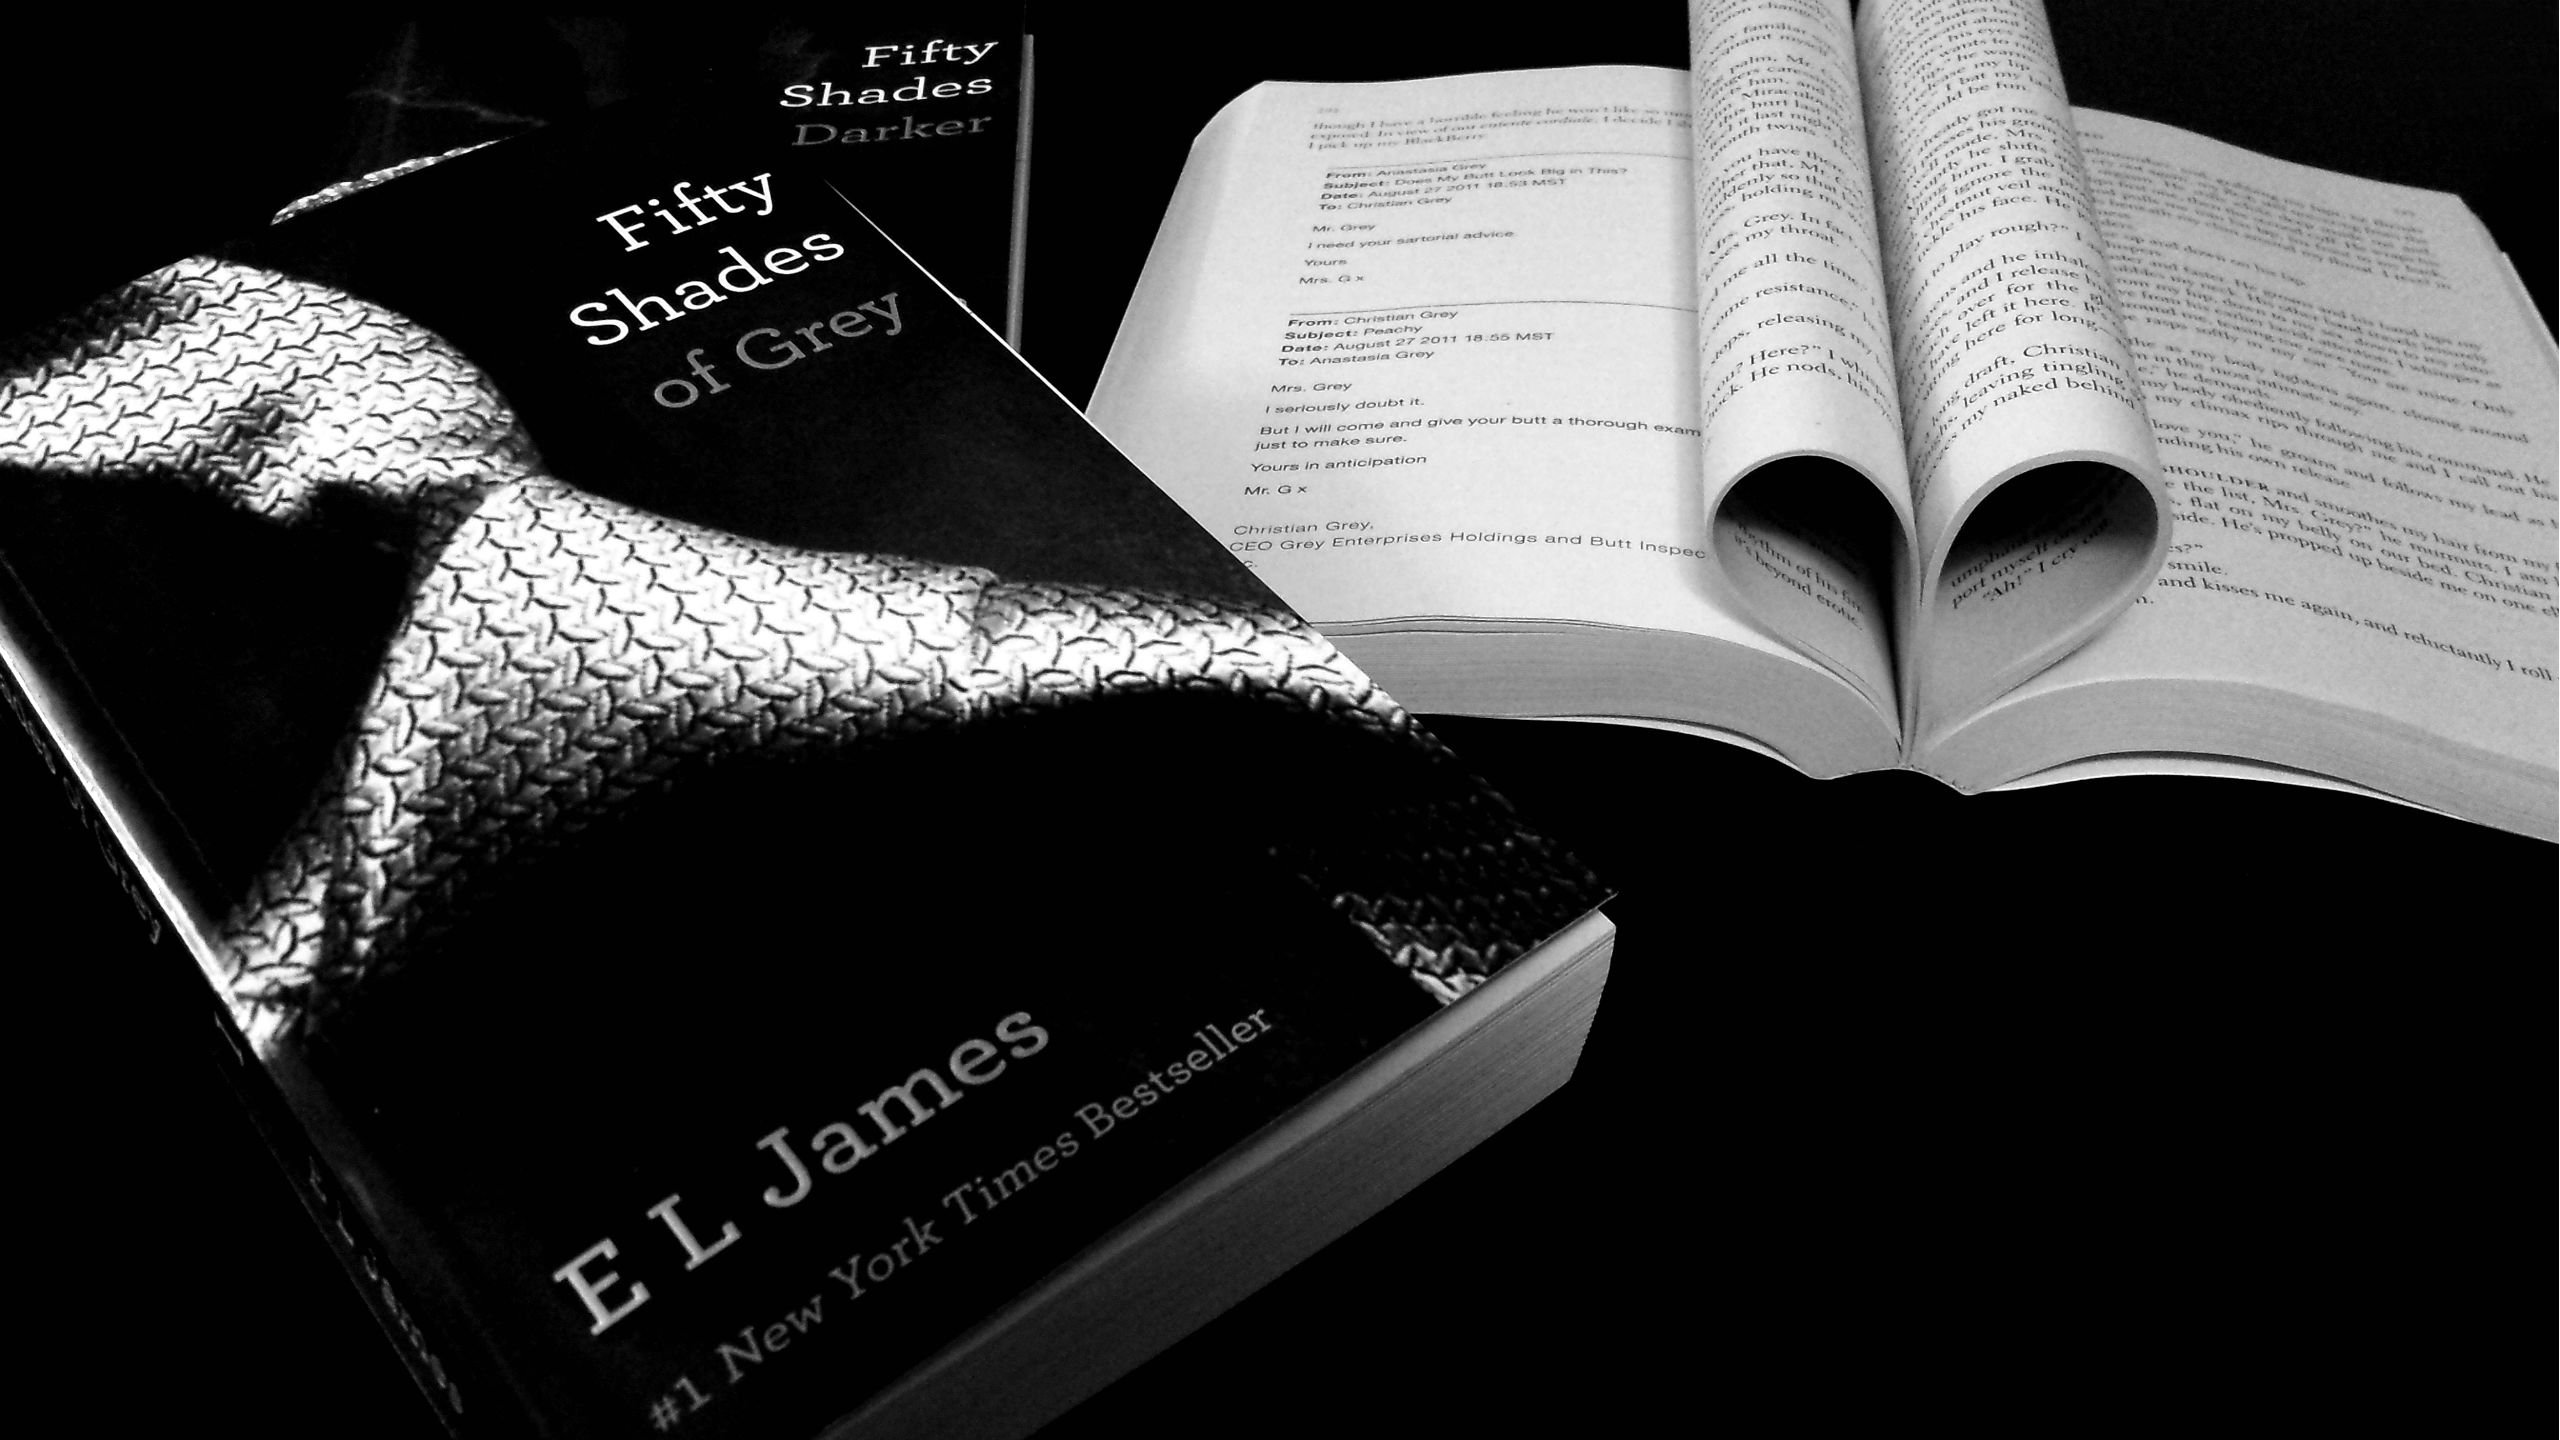 50 shades of grey book free download